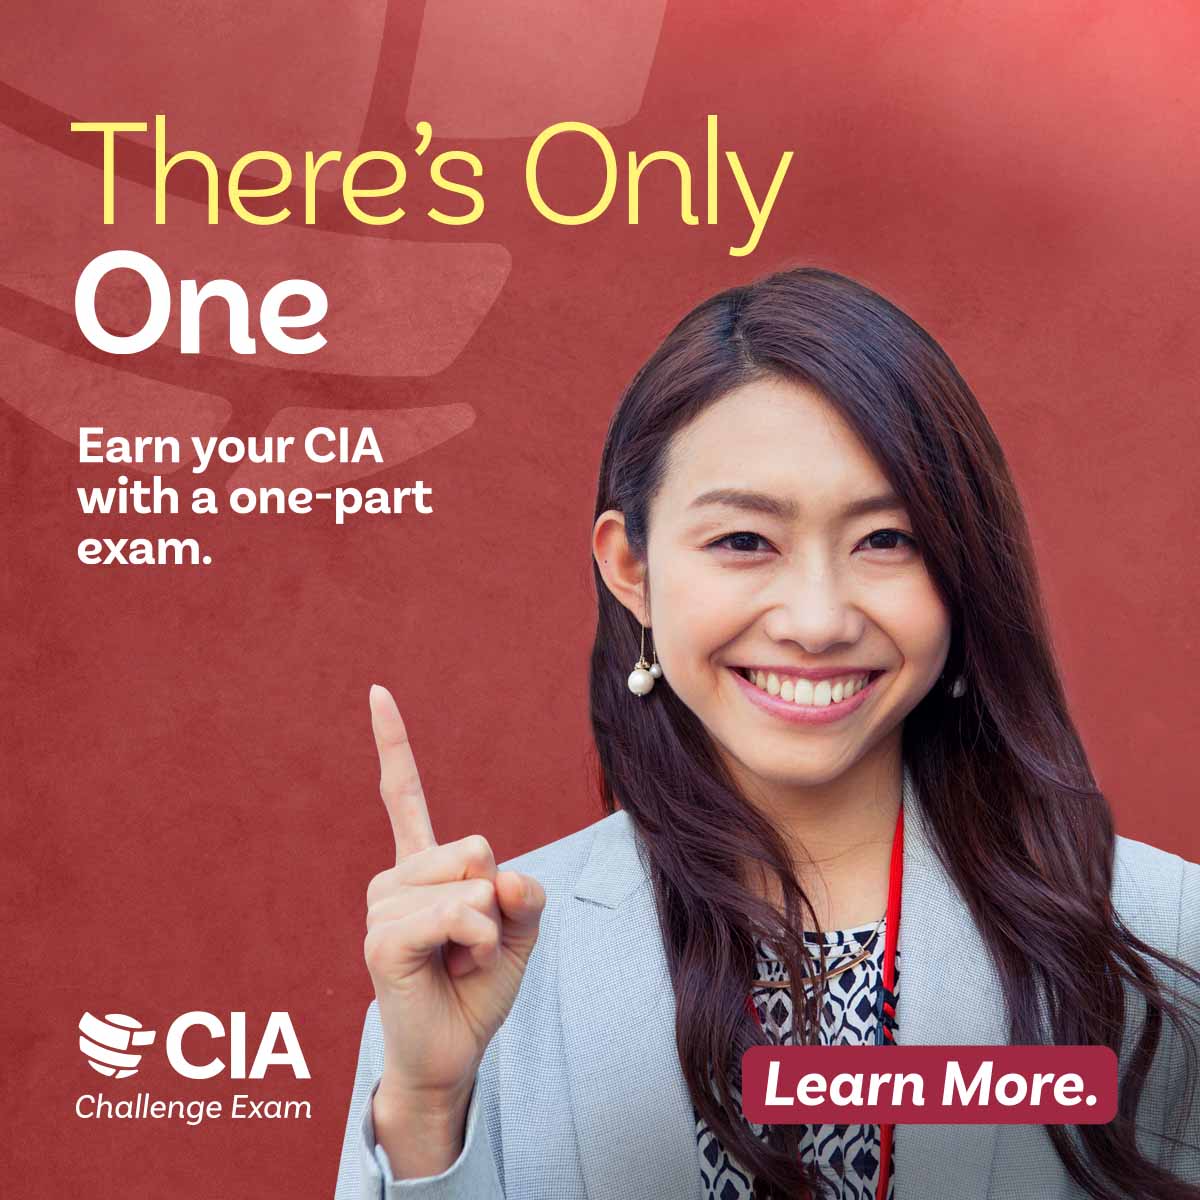 There’s Only One. For a limited time, eligible CISA™ holders can earn the CIA® credential by taking a one-part exam known globally as a “Challenge Exam.” The application window is now open for registration!
CISA™ is a trademark of ISACA.
#CIAchallengeexam #Internalaudit #TheIIA